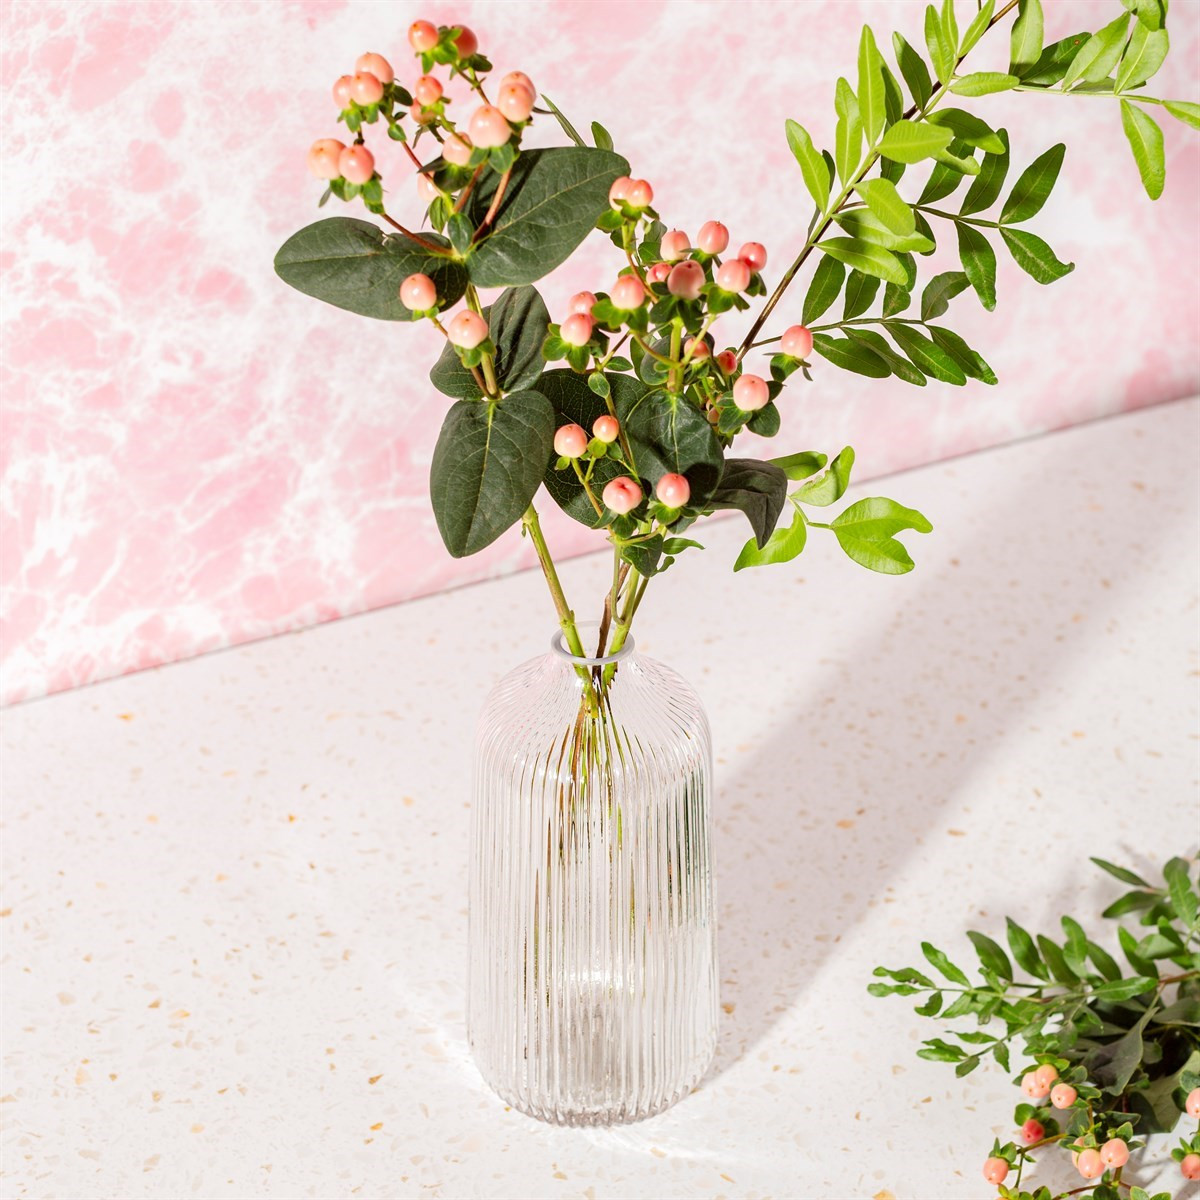 Sass & Belle Fluted Glass Vase, Clear - Tall>